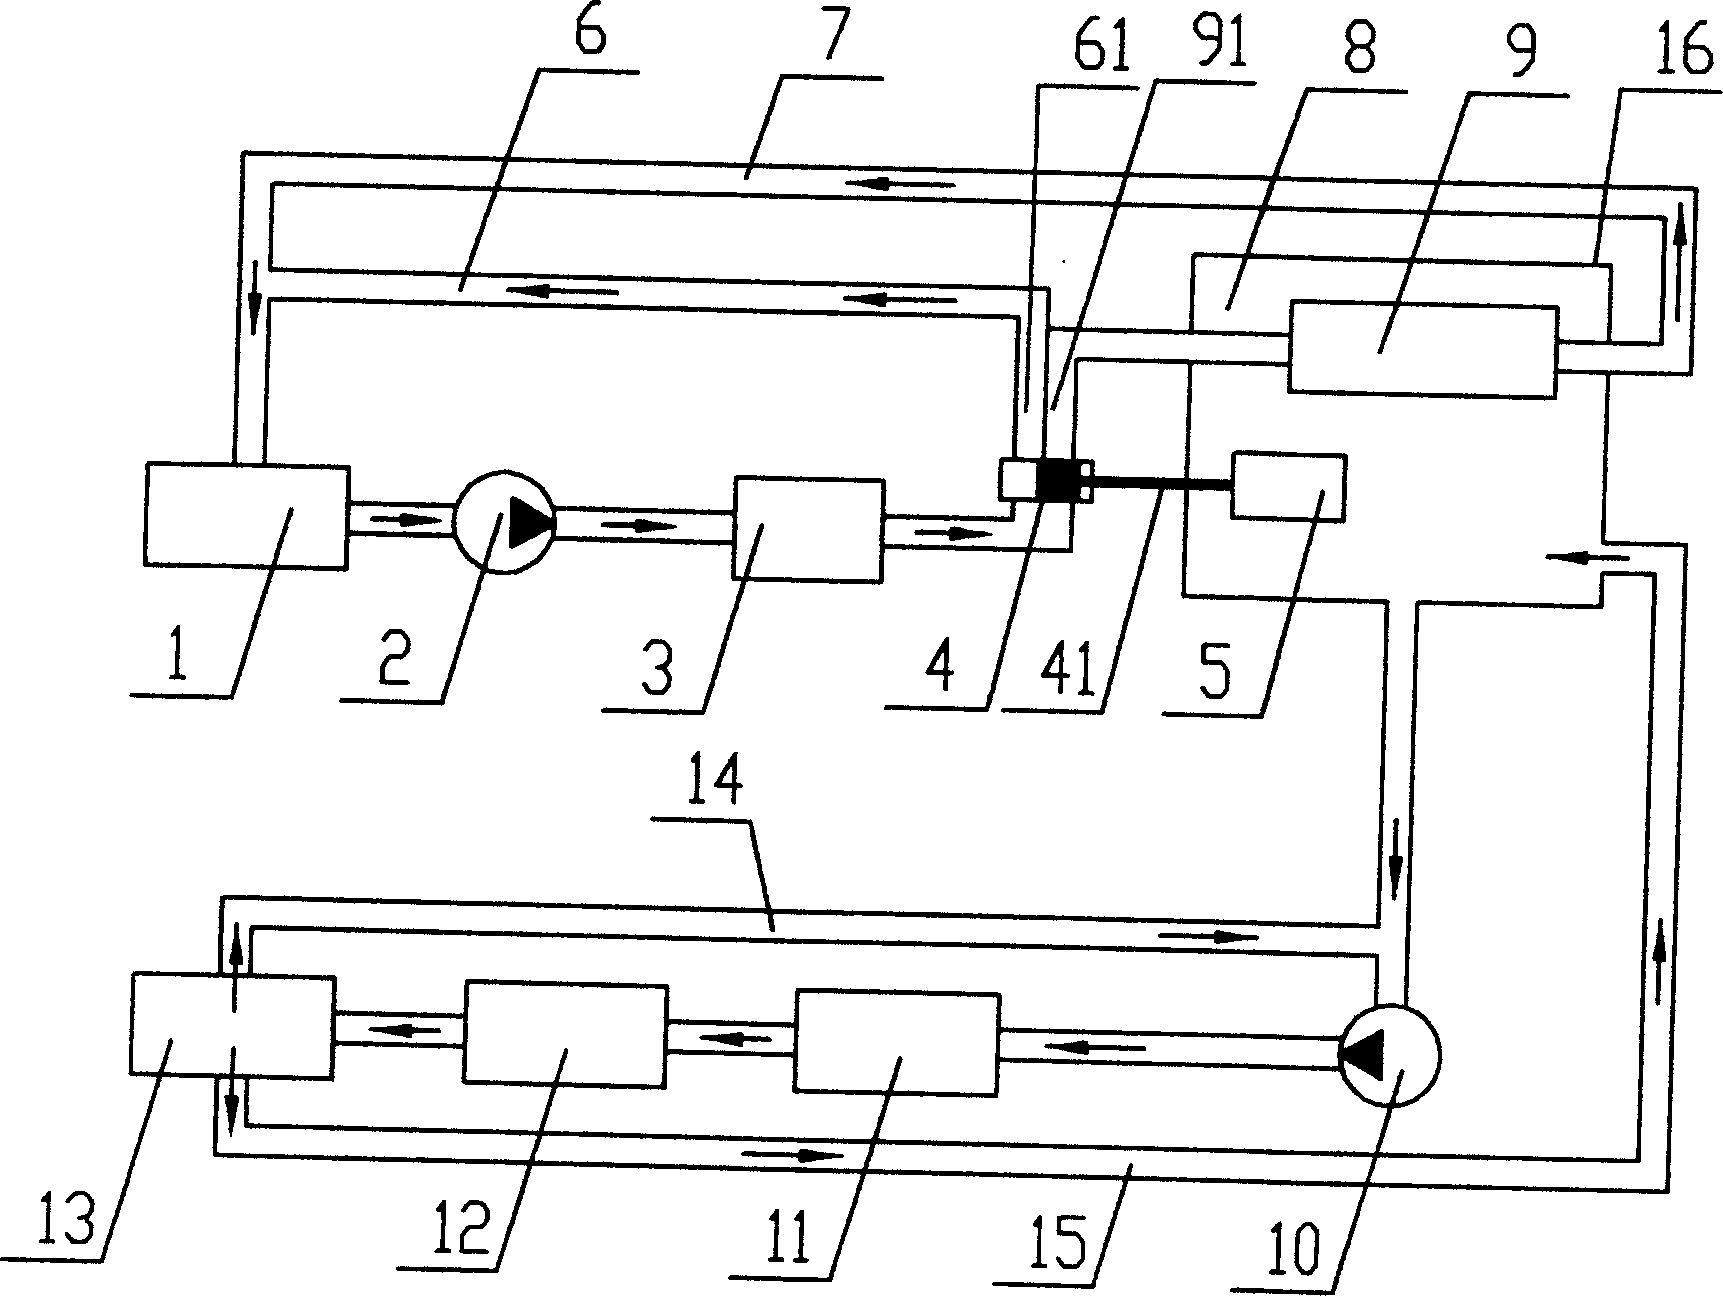 Engine dual-cycle forced cooling system